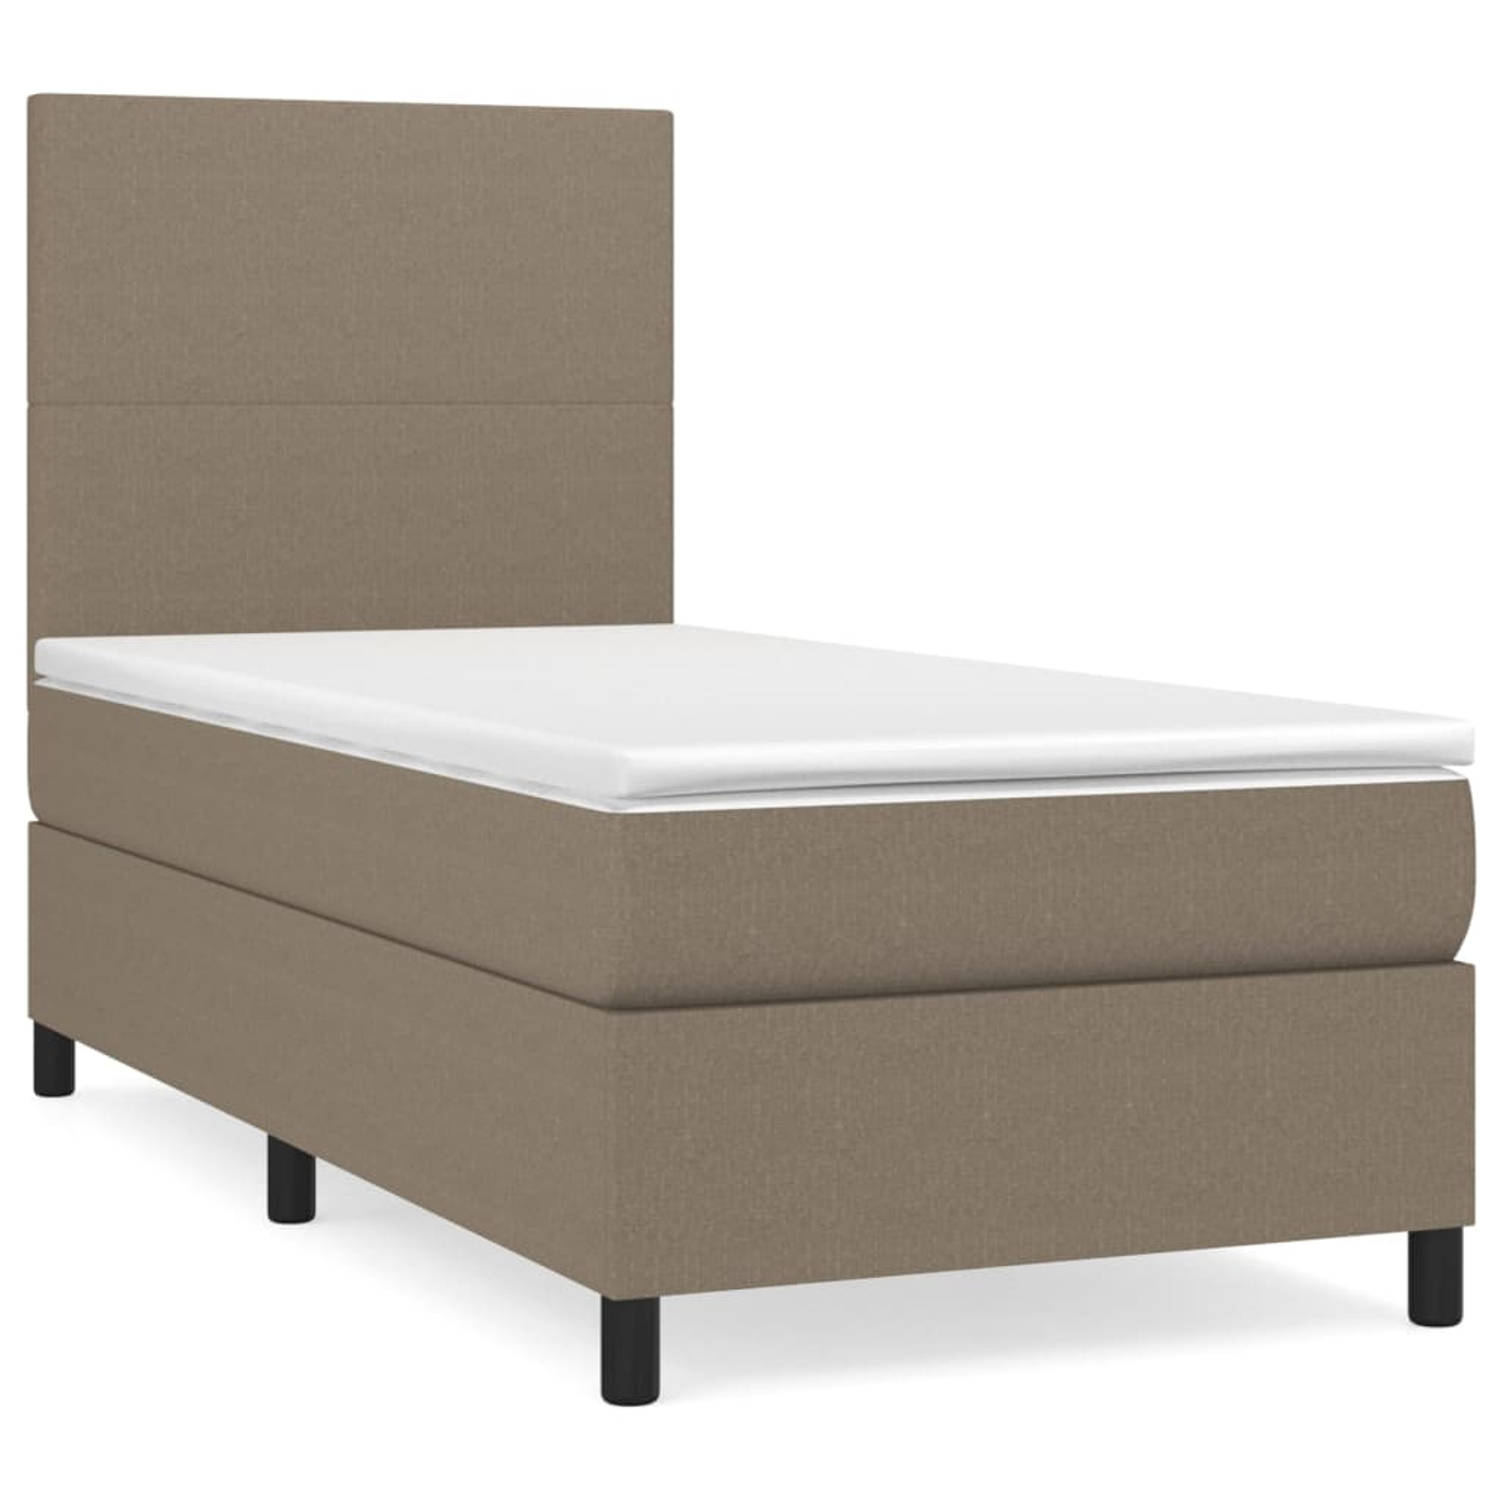 The Living Store Boxspringbed - Comfort - Bed - 203 x 83 x 118/128 cm - Taupe - Stof (100% polyester)